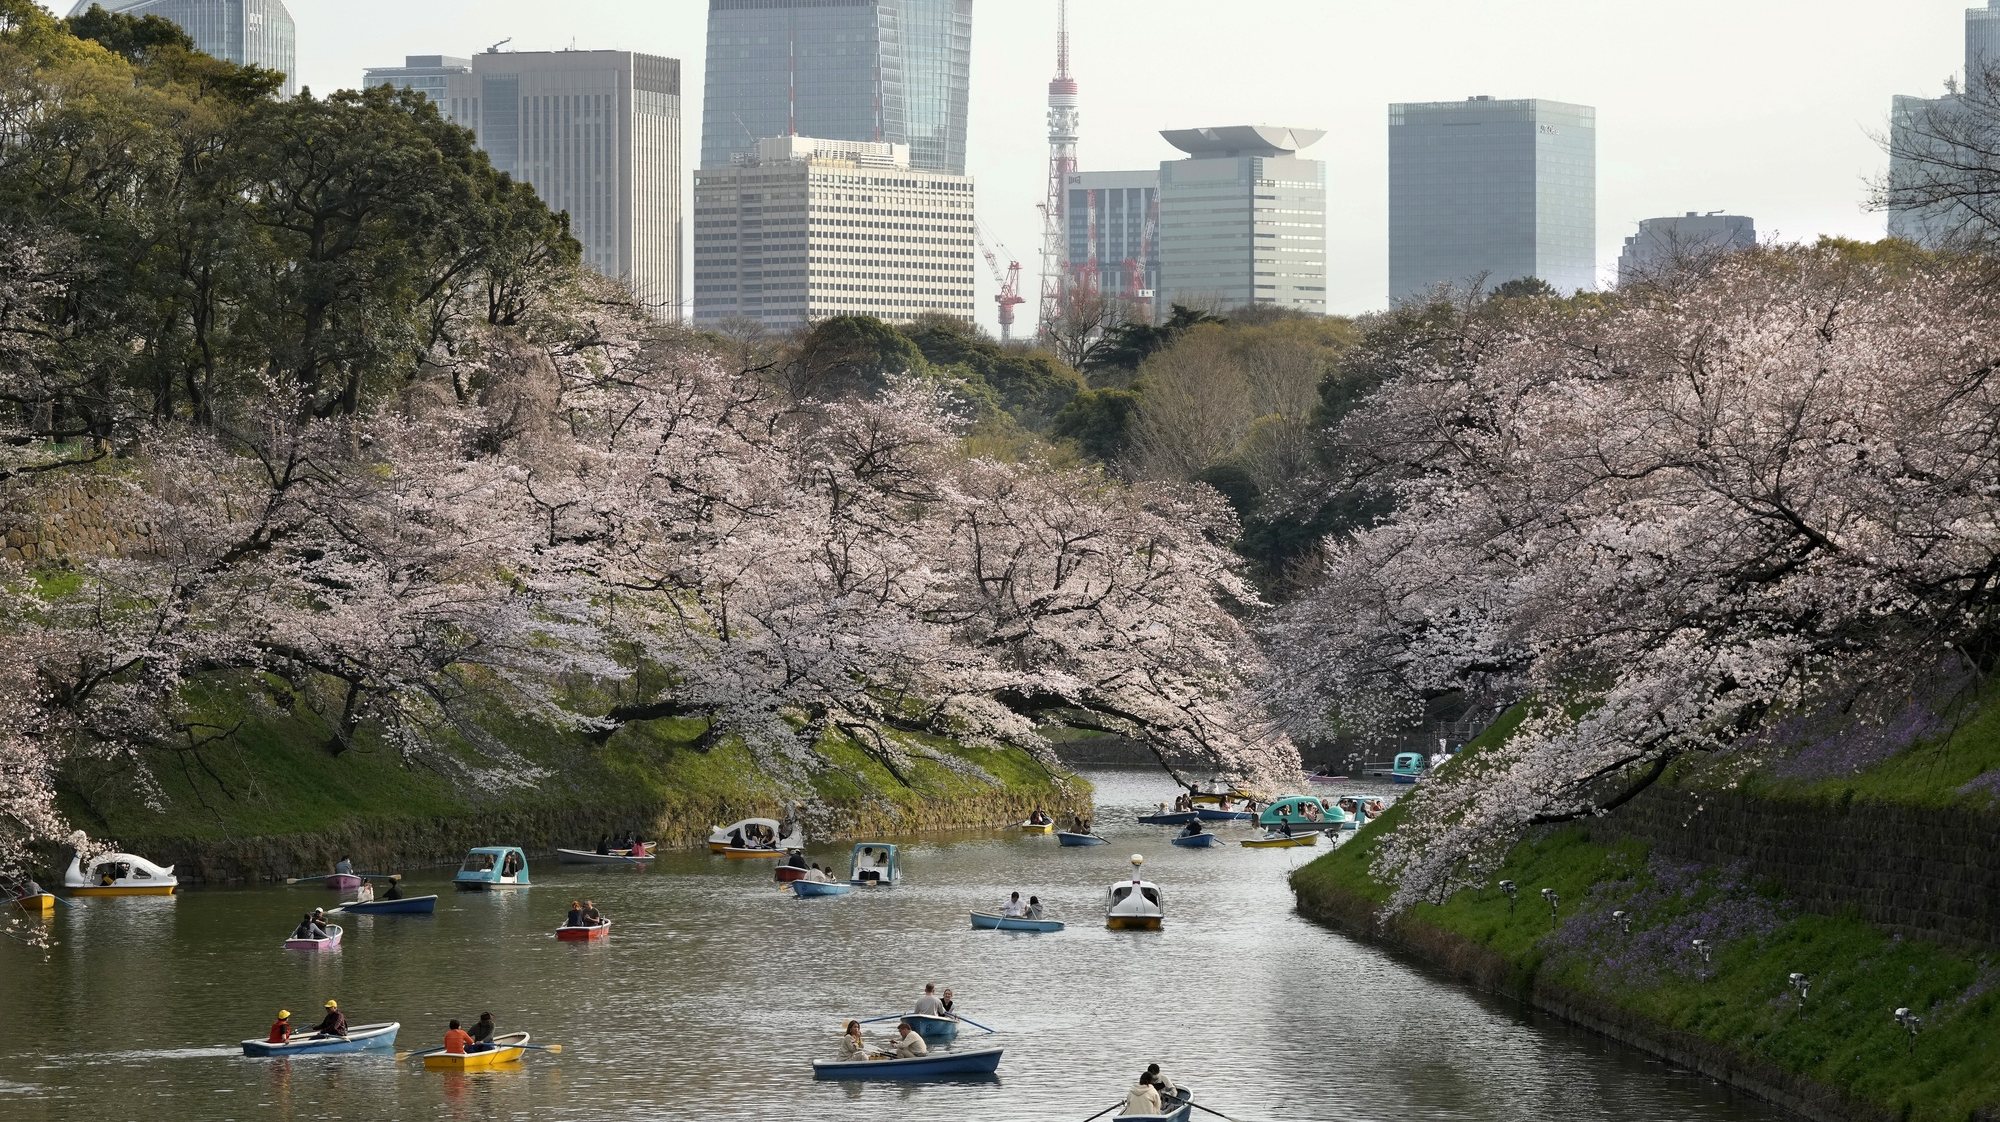 epa10536638 People enjoy the of view cherry blossoms as they row their boats on Chidorigafuchi moat in Tokyo, Japan, 22 March 2023. The temperature marked 23.8 degrees Celsius, 8.8 degrees higher than the usual average, almost same as mid-May in the Japanese capital. The blossoms marked the earliest bloom record starting on 14 March, ten days earlier than usual. Weather forecasts expect the full bloom on the upcoming weekend in Tokyo.  EPA/KIMIMASA MAYAMA